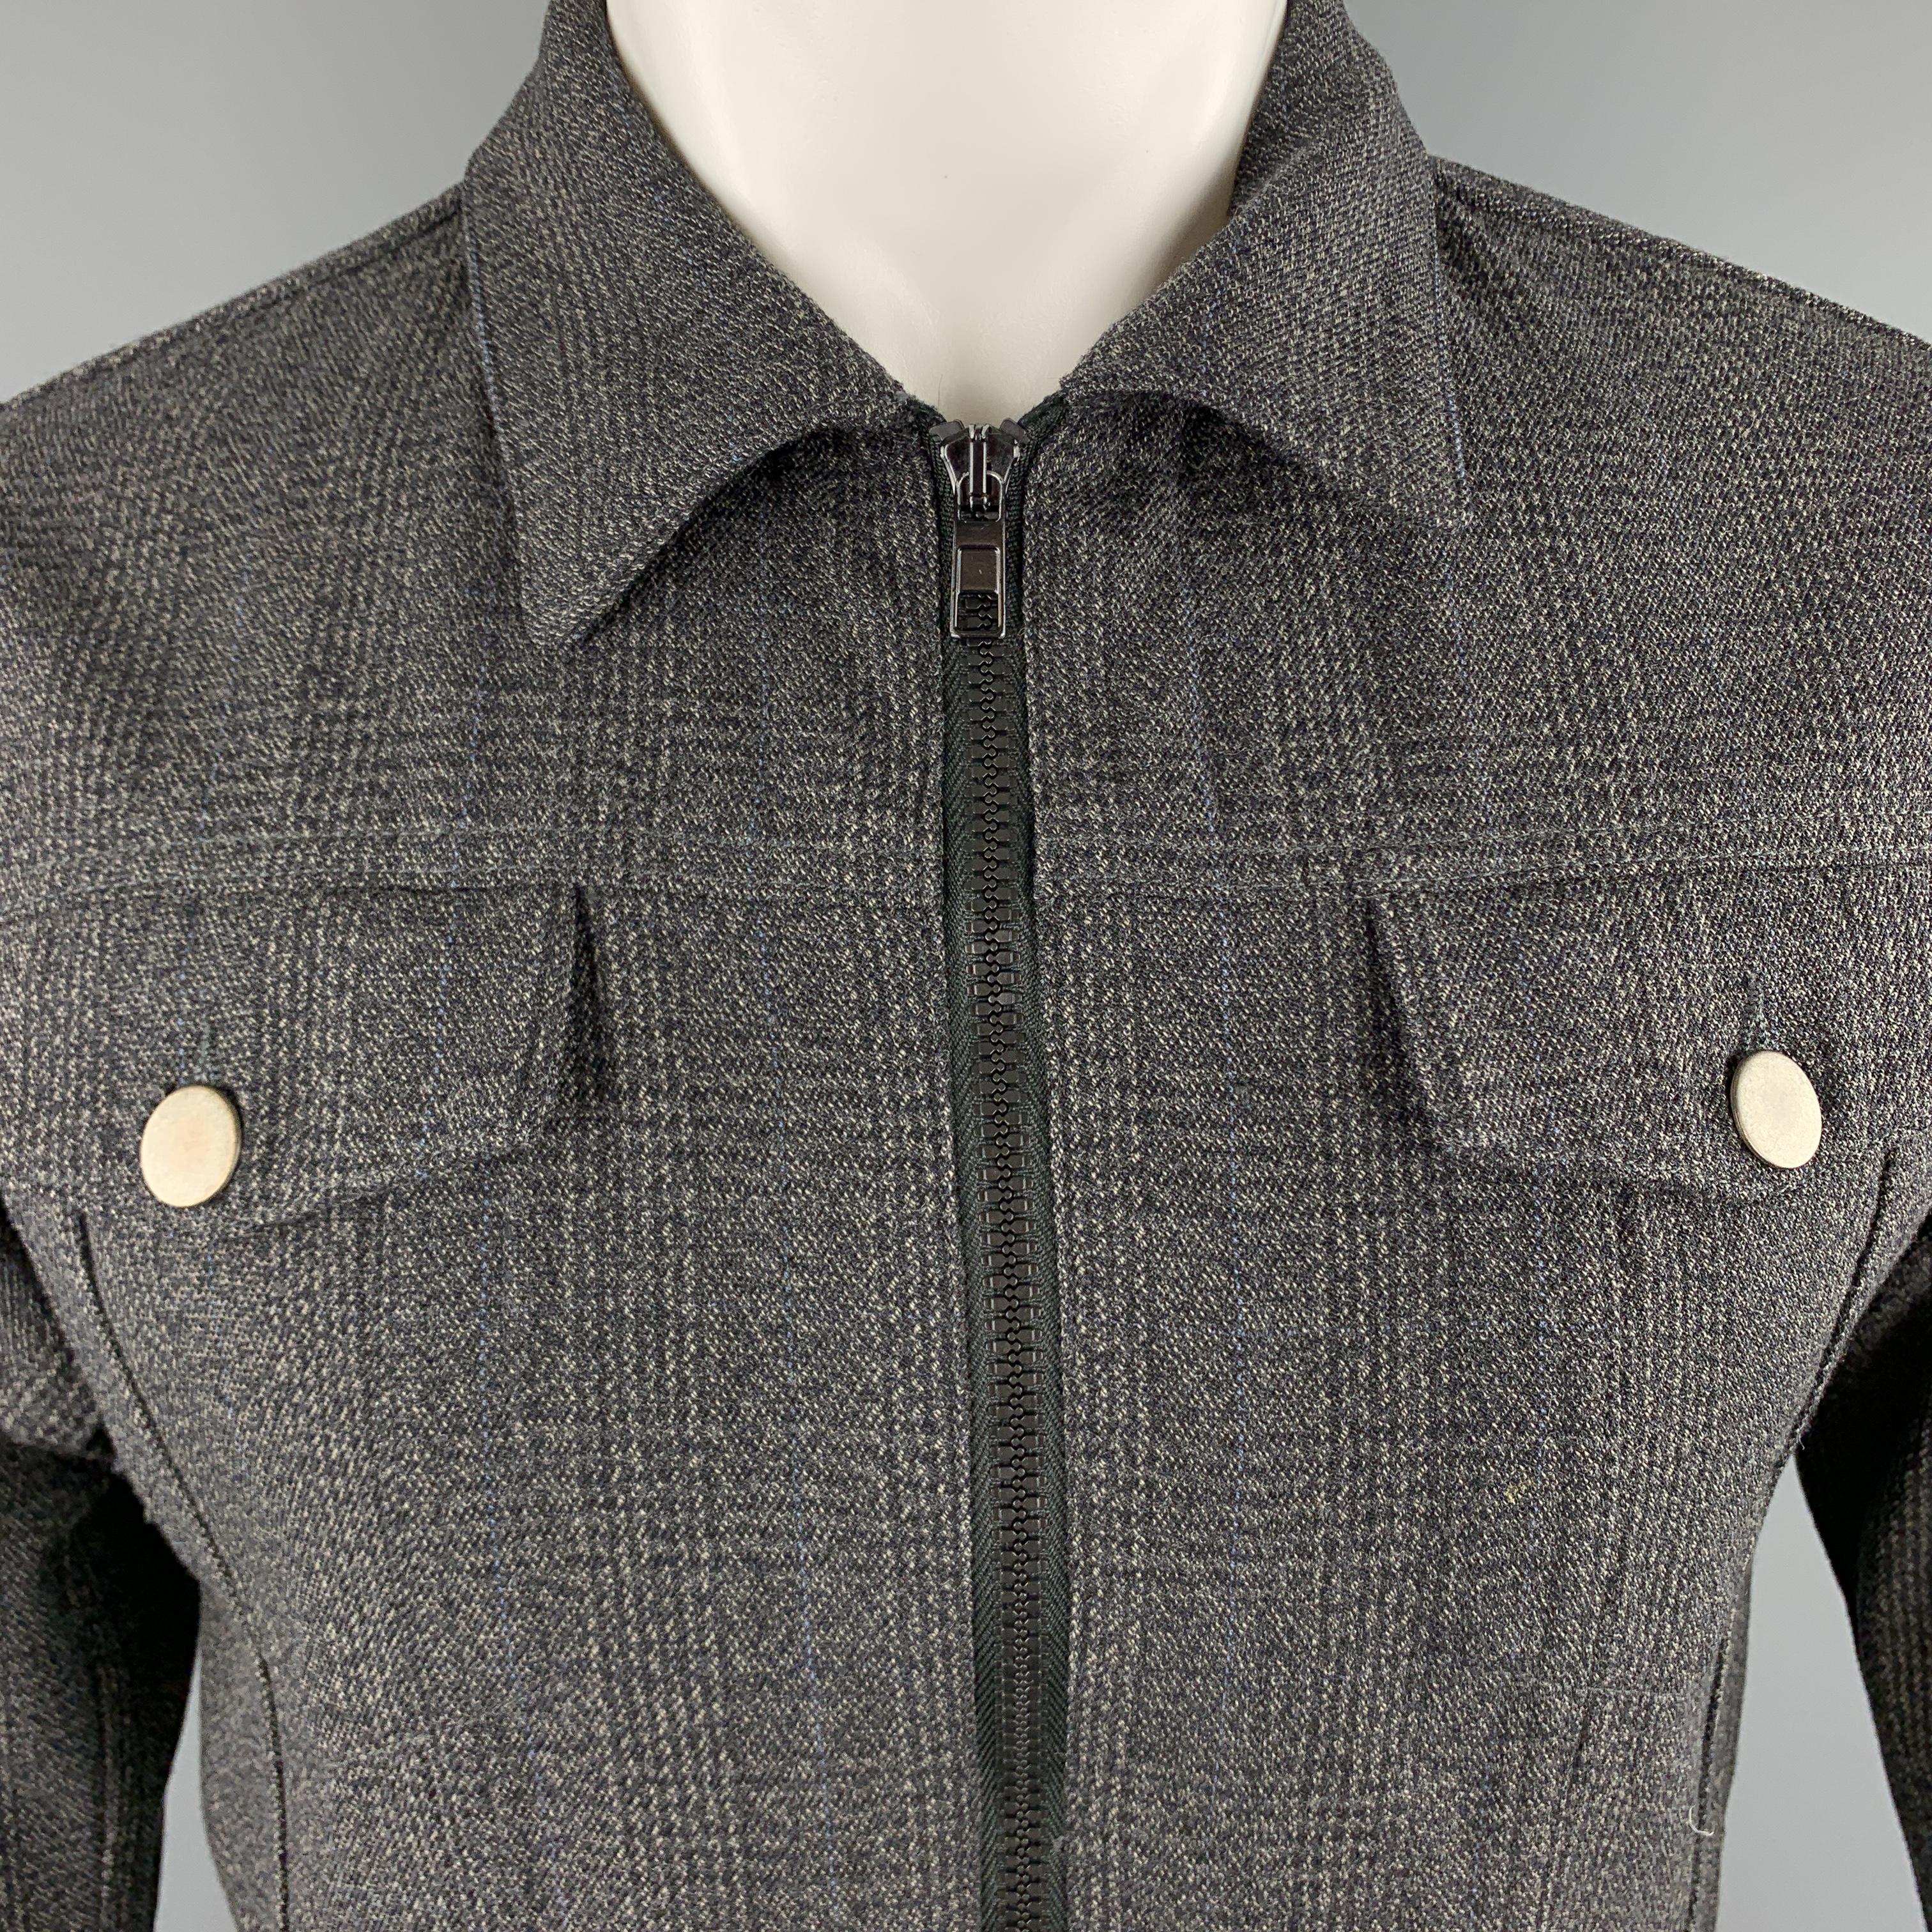 MARC JACOBS trucker jacket comes in gray glenplaid woven yack material with a pointed collar, flap pockets, and zip front. Made in Italy.

Excellent Pre-Owned Condition.
Marked: IT 46

Measurements:

Shoulder: 15 in.
Chest: 40 in.
Sleeve: 26